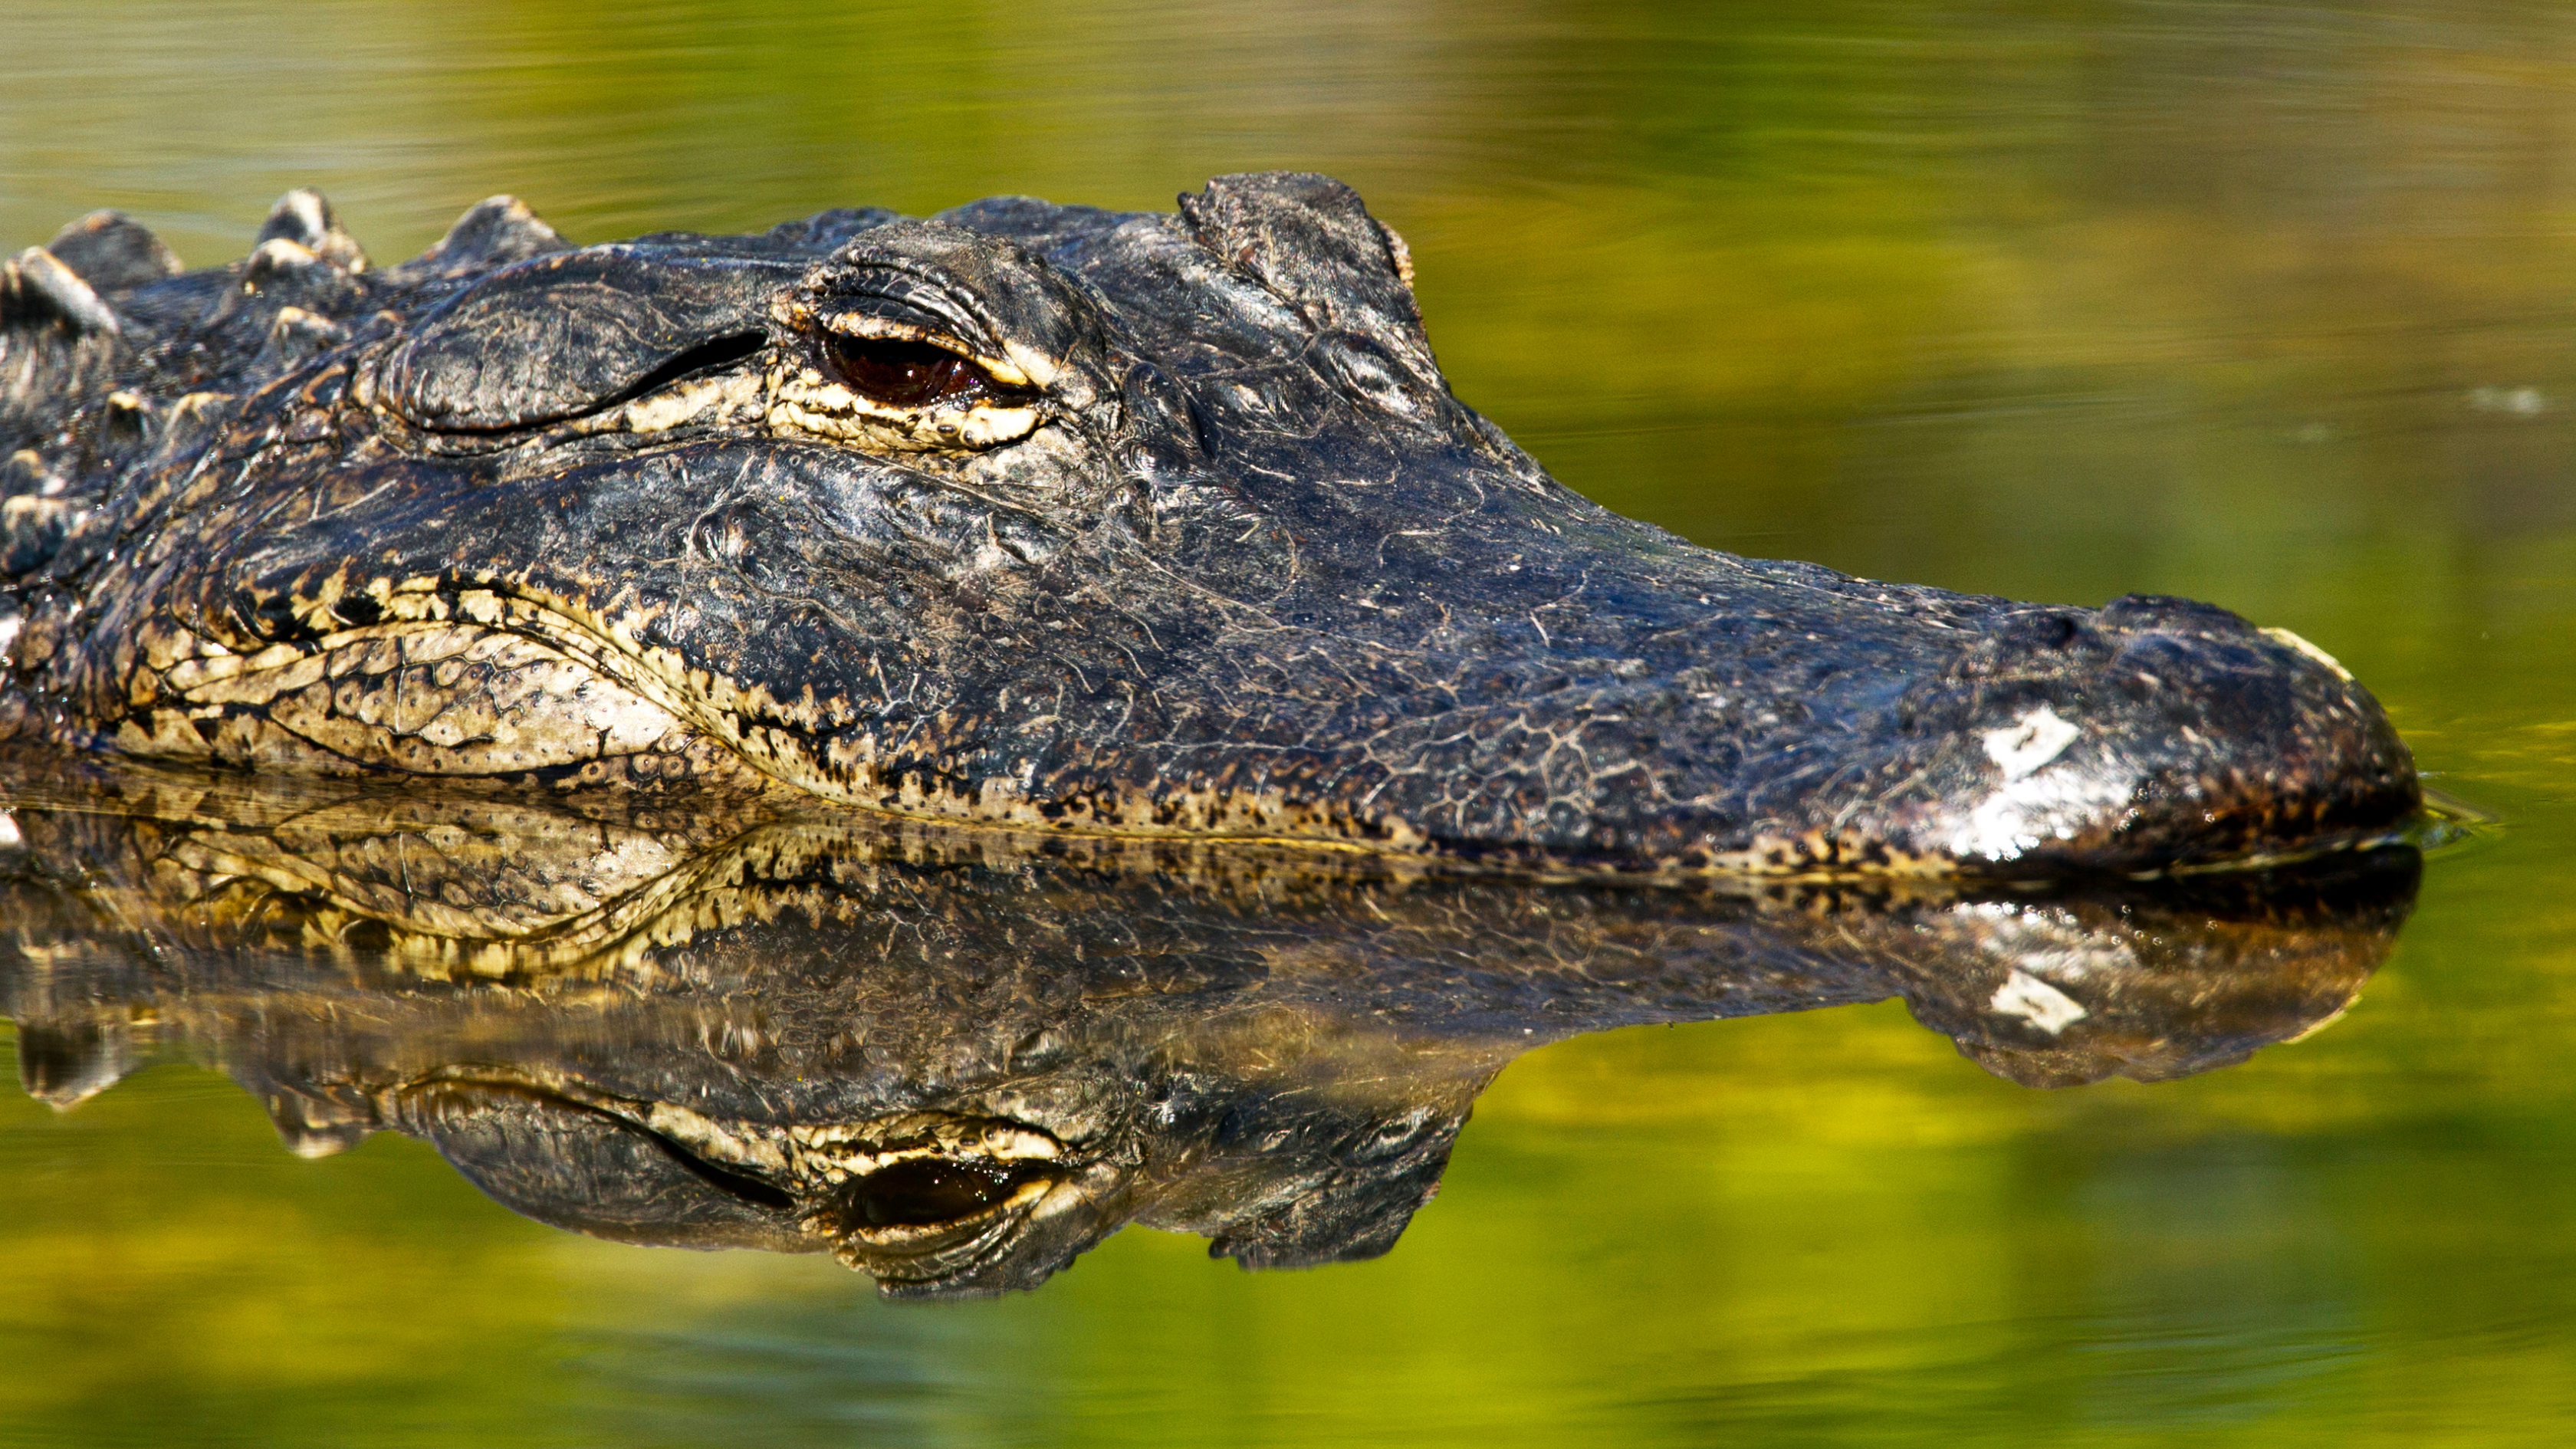 The 2022 Alabama Alligator Harvest “Lottery” Opens June 7th